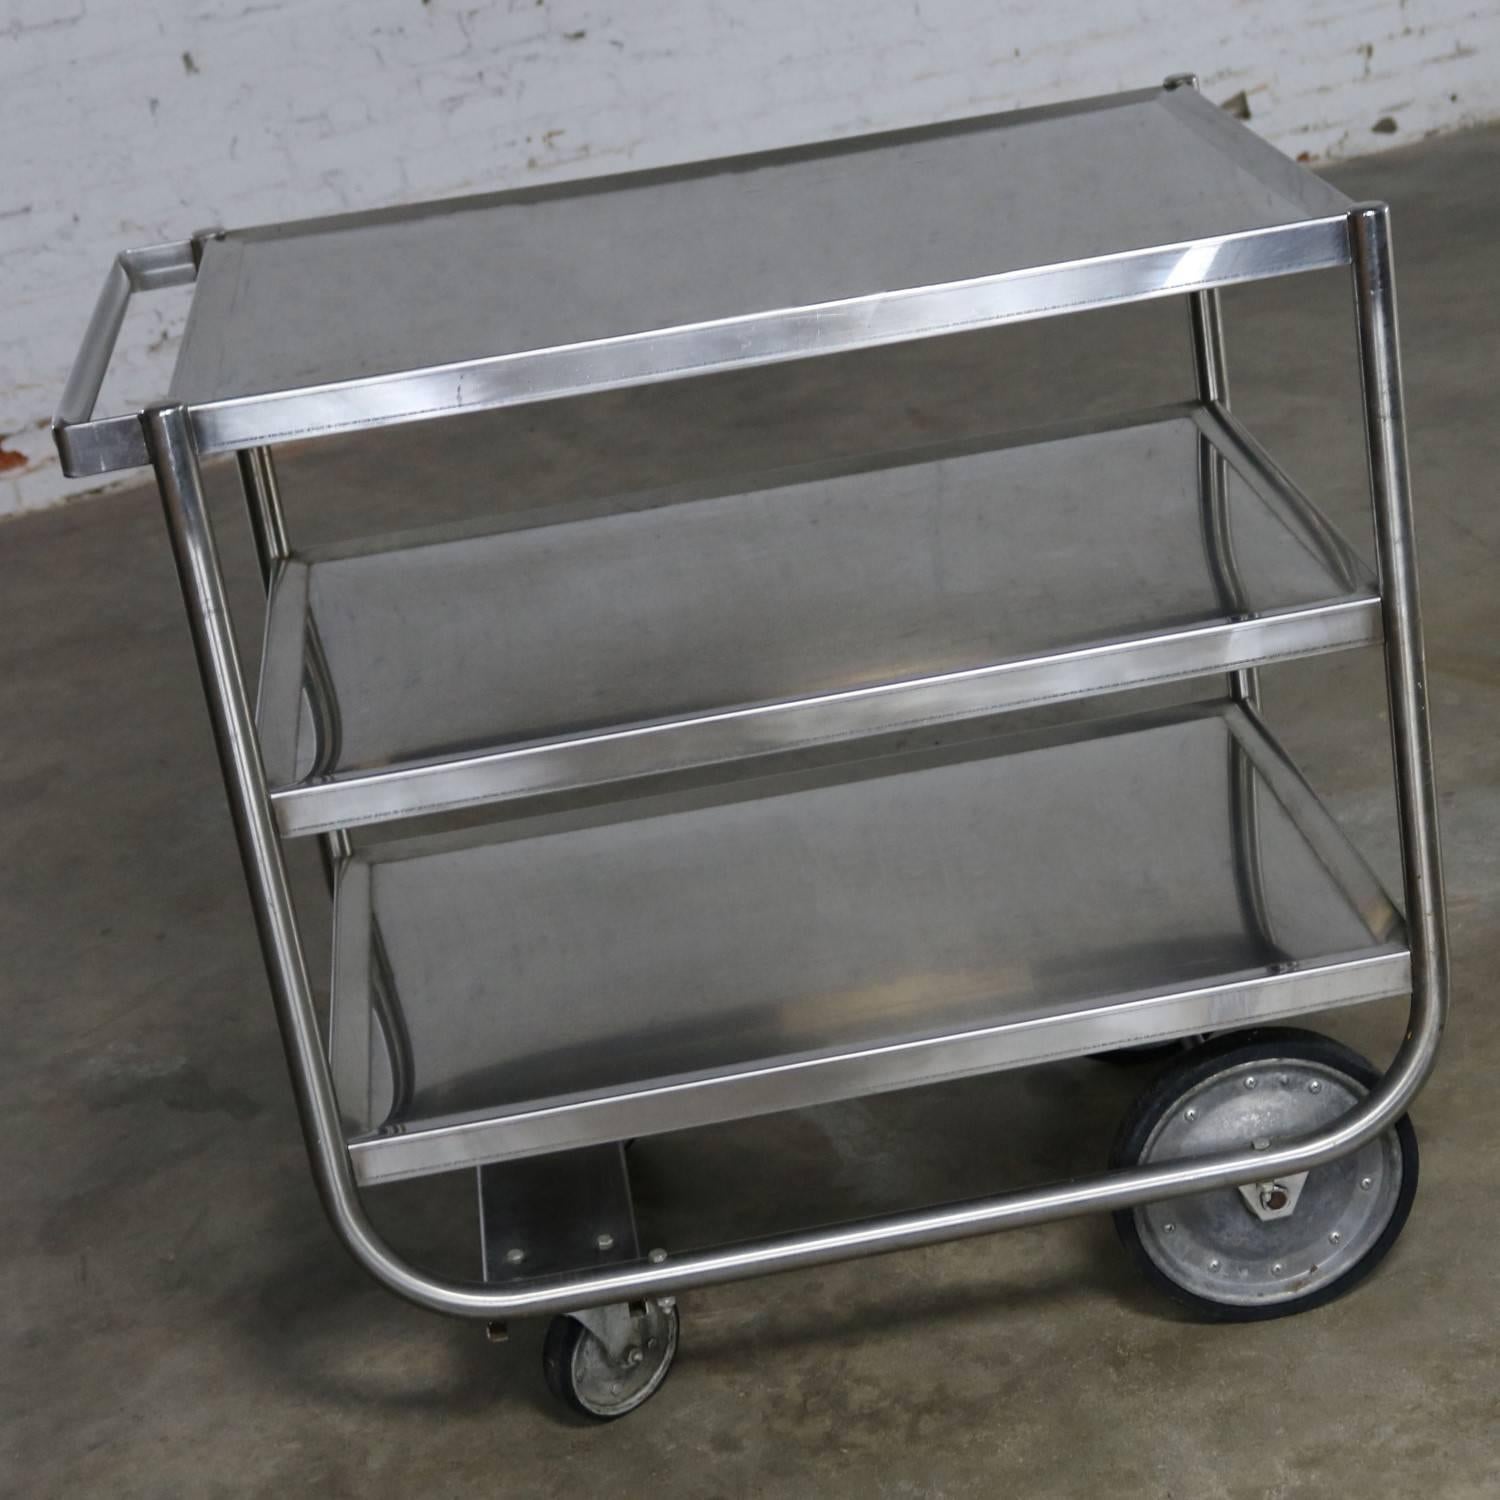 Awesome vintage Industrial three tier heavy gauge stainless steel rolling cart. It is in wonderful vintage condition with a nice overall patina to the stainless which includes small scratches and dings. The wheels are galvanized with hard rubber